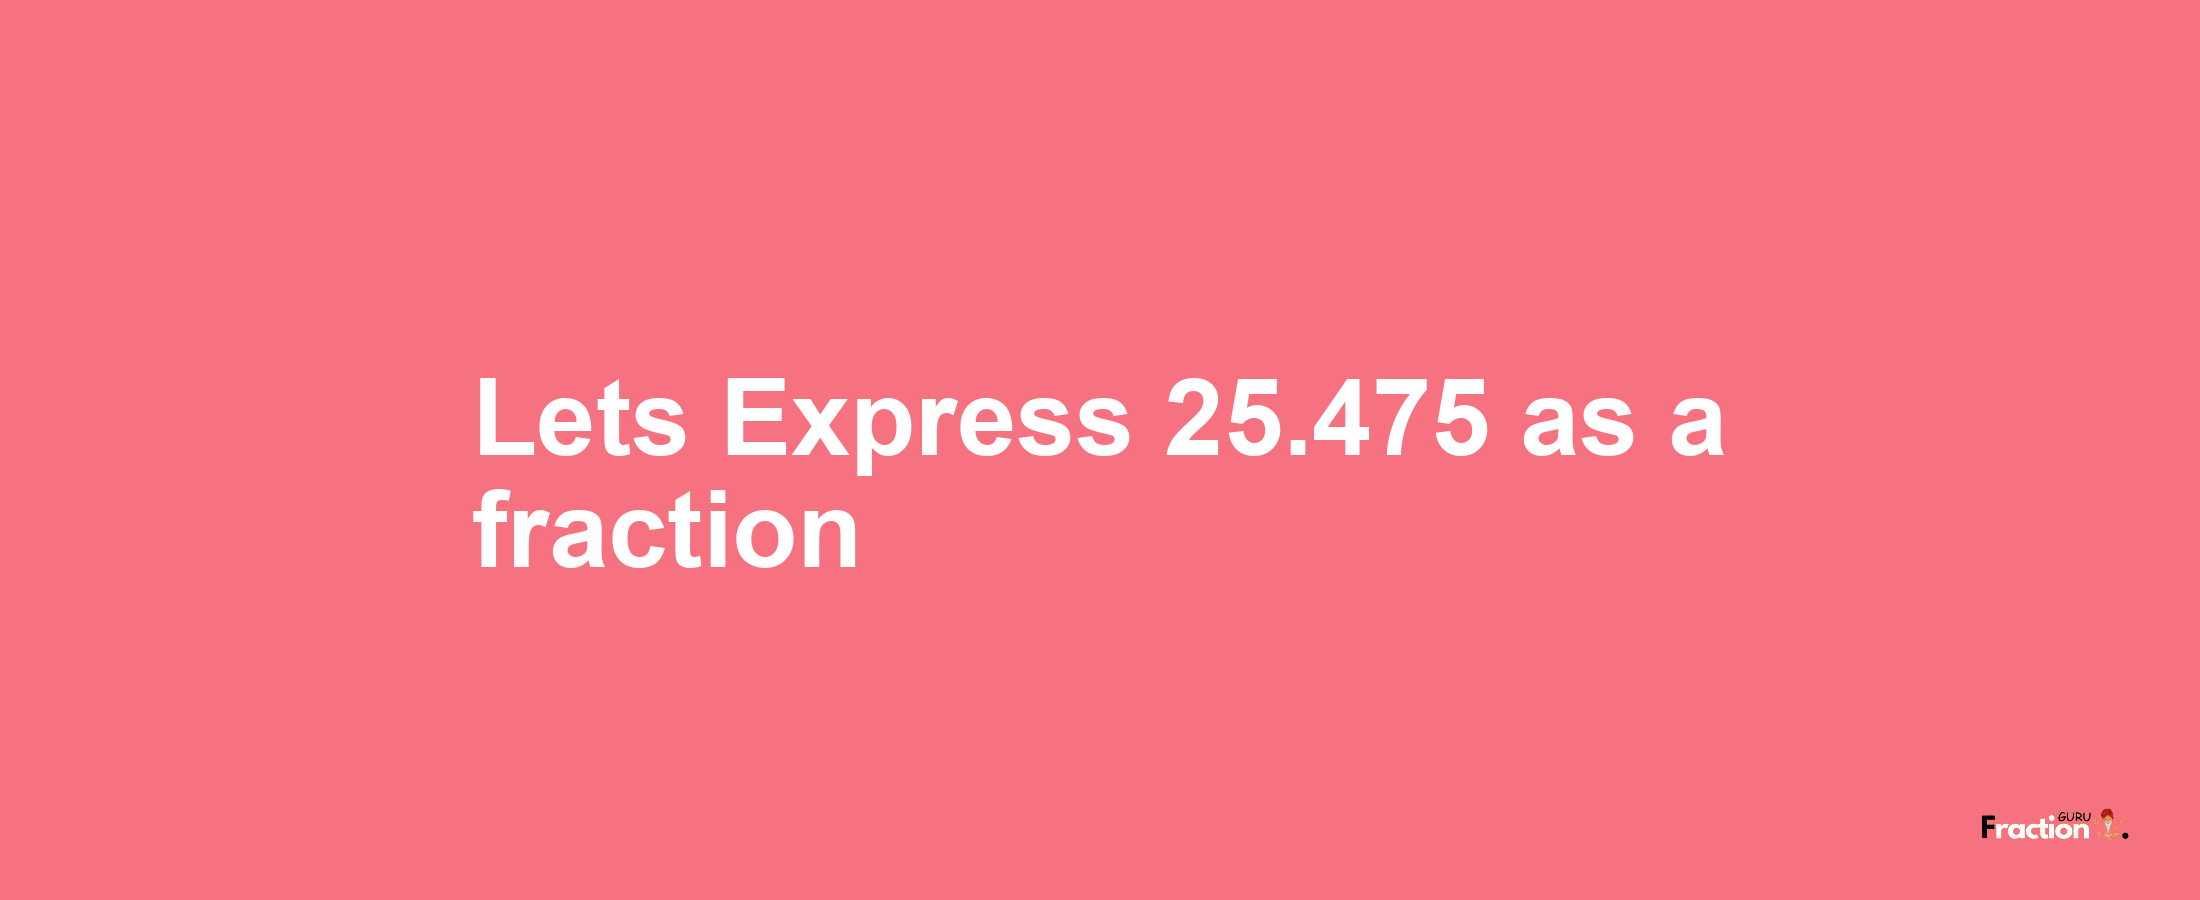 Lets Express 25.475 as afraction